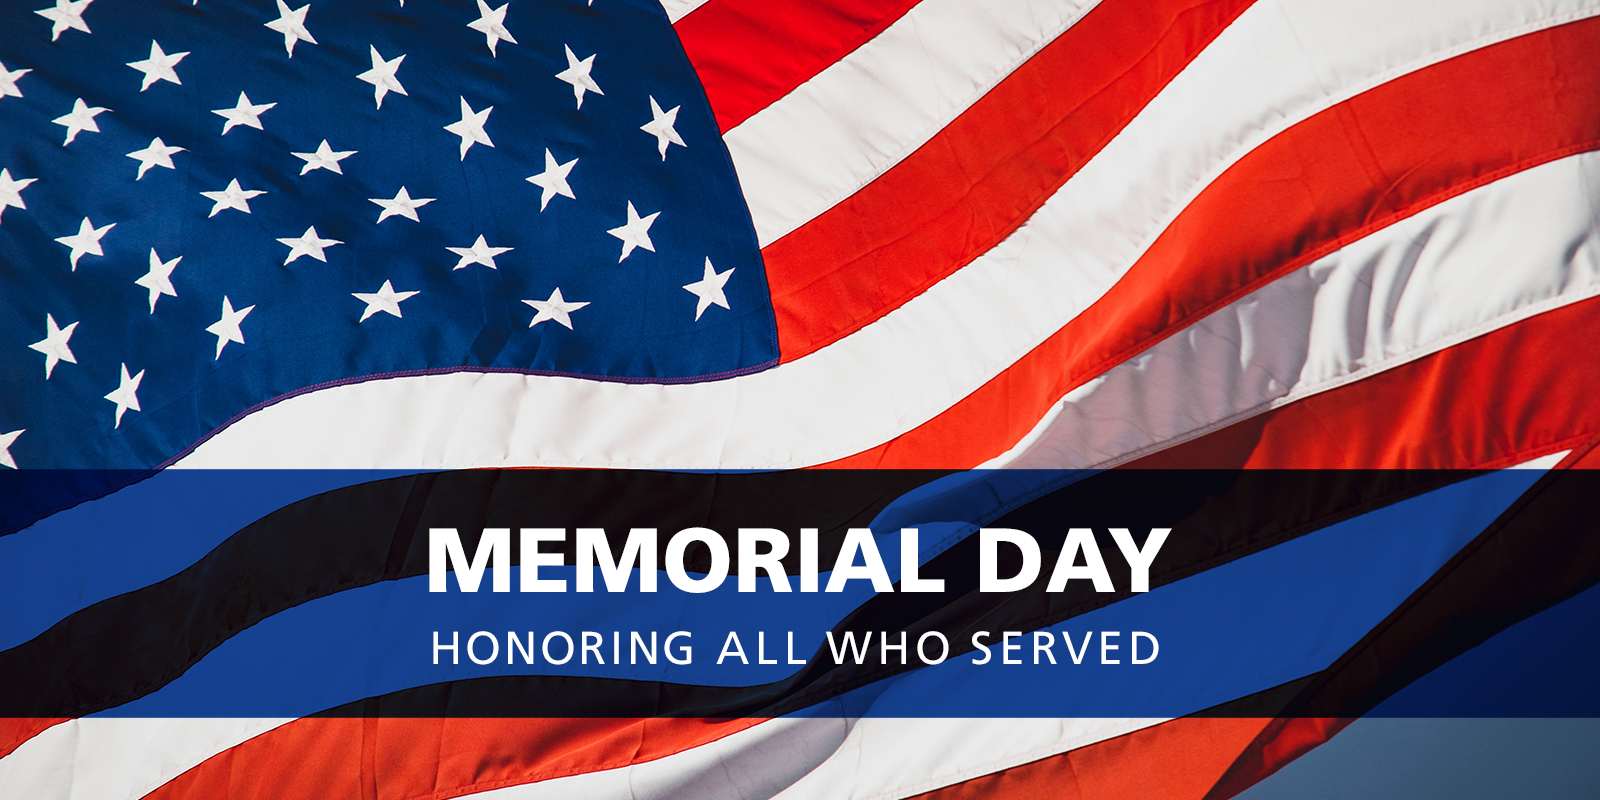 Phc Corporation Of North America A Twitter This Memorial Day We Support And Honor The Men And Women Who Defended Our Nation Thank You For Your Service Memorial Memorialday Veterans Thankyou Phcbi